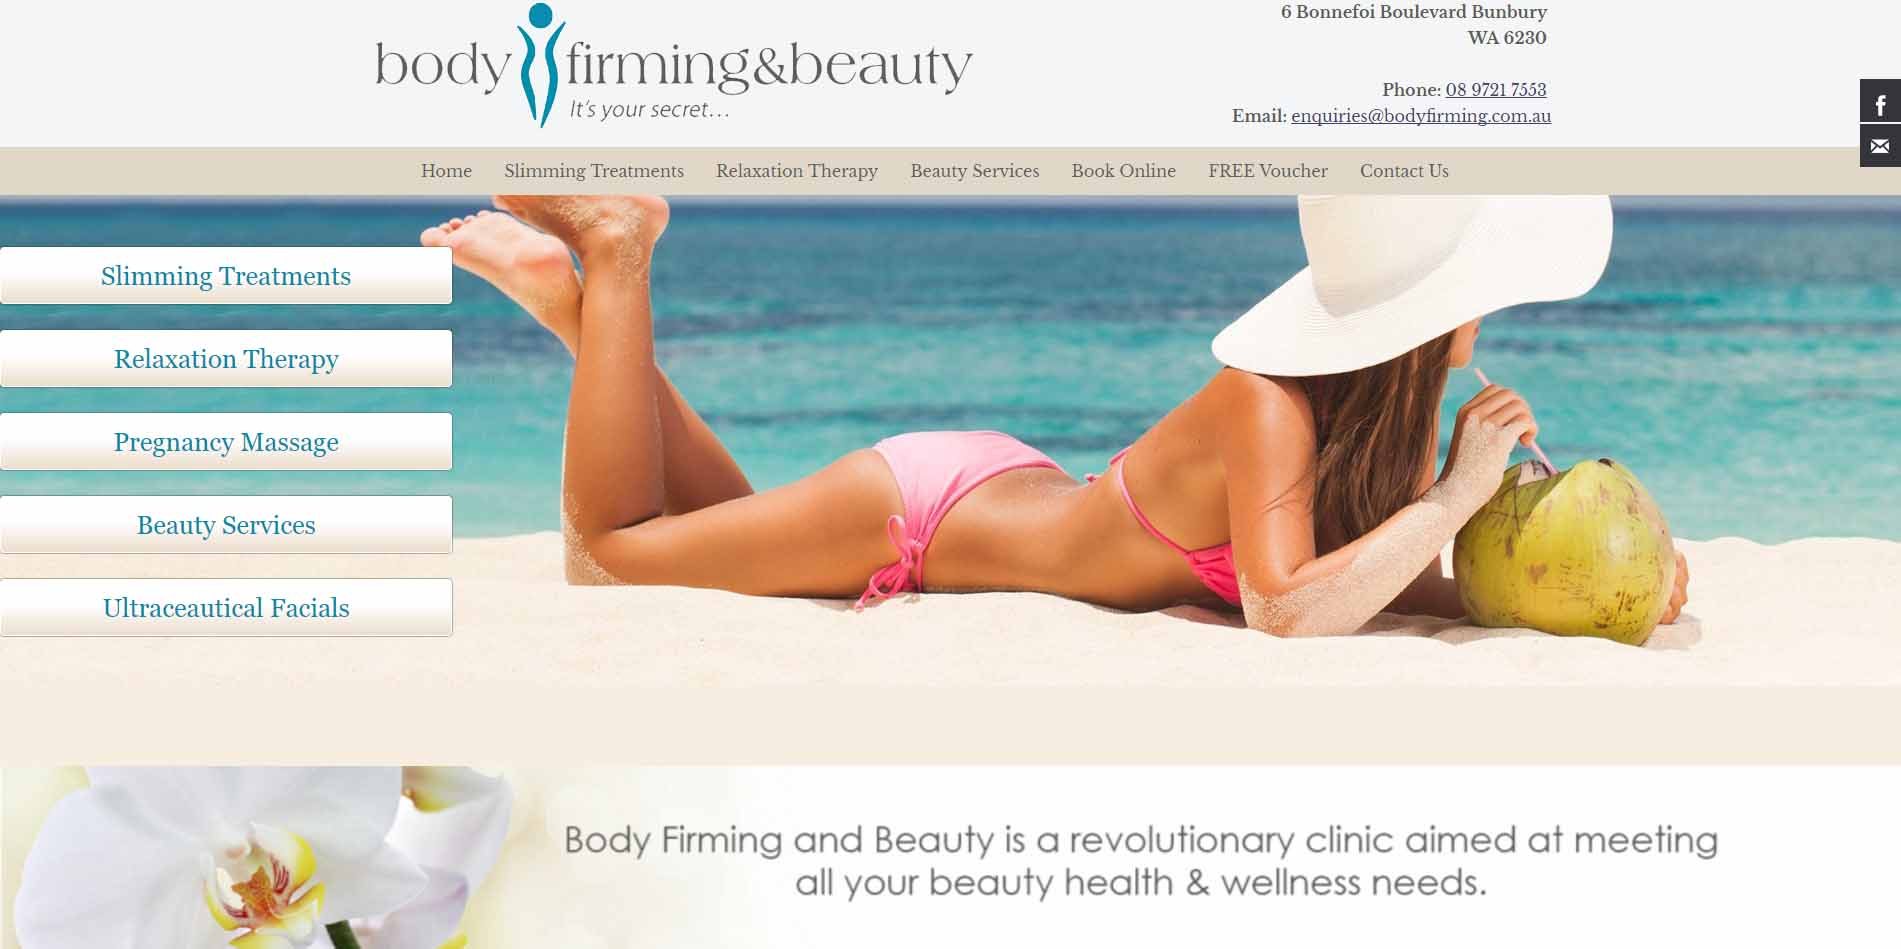 Body Firming and Beauty